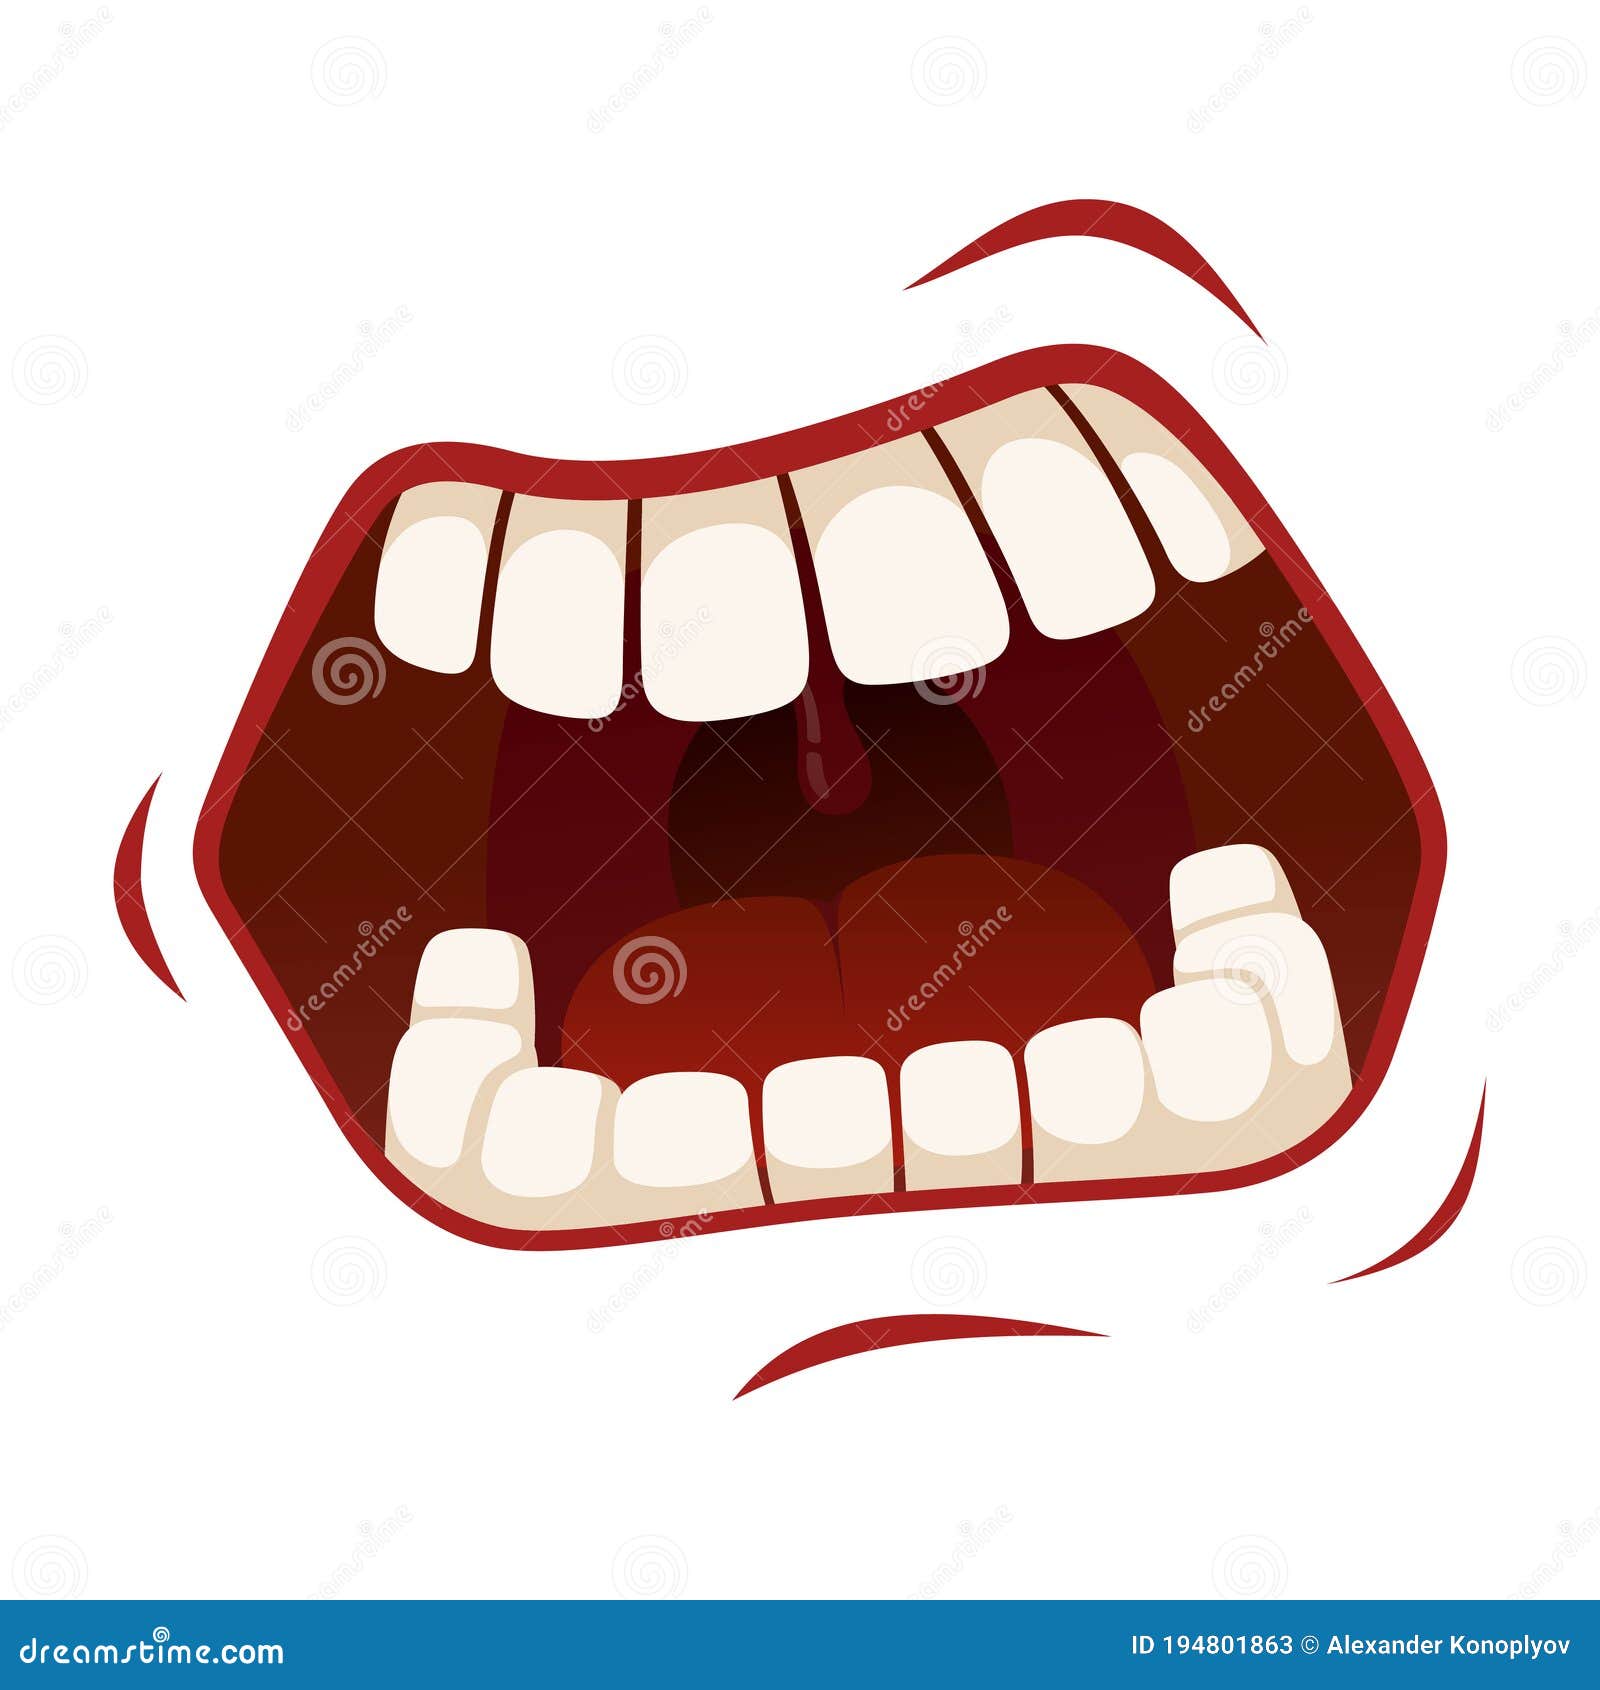 Screaming Mouth, Crazy or Angry Human Emotion Stock Vector - Illustration  of away, face: 194801863